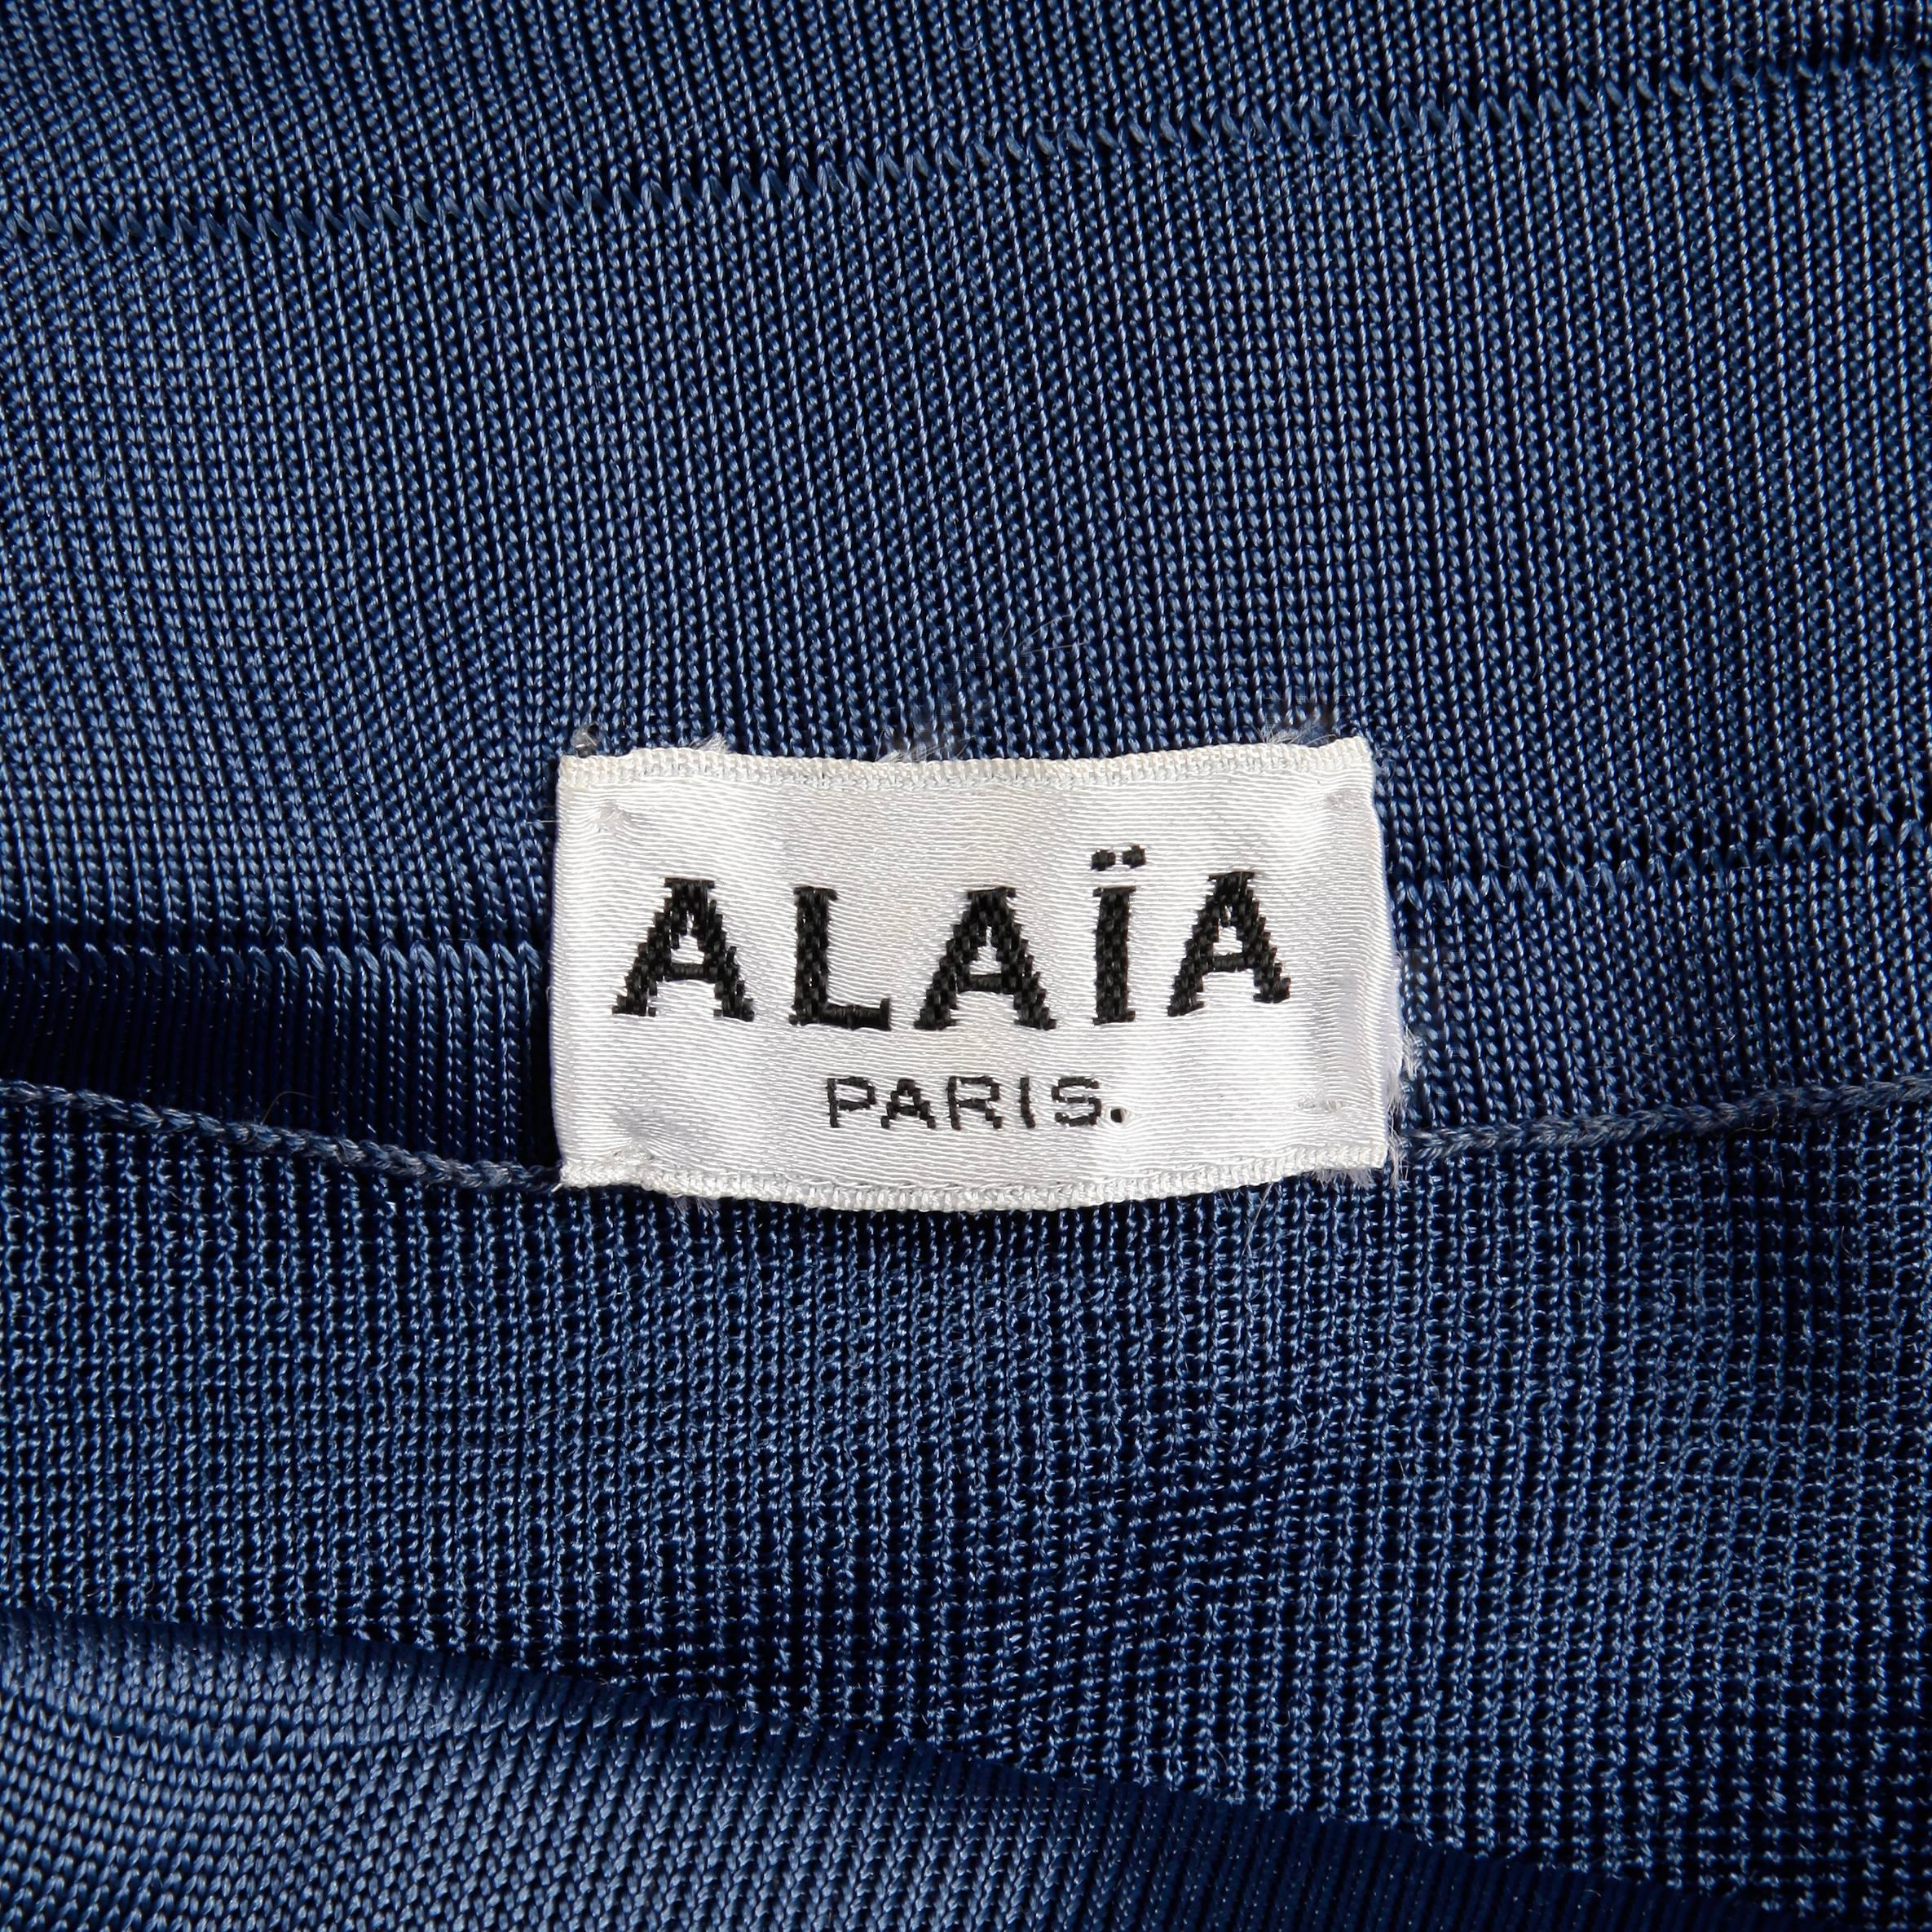 Sexy vintage blue knit mini skirt by Alaia. Unlined with no closure (pulls on over the hips).  The marked size is small. 100% acetate. The waist measures 23-28" (unstretched-stretched), hips 35-39" and the total length 17.5".